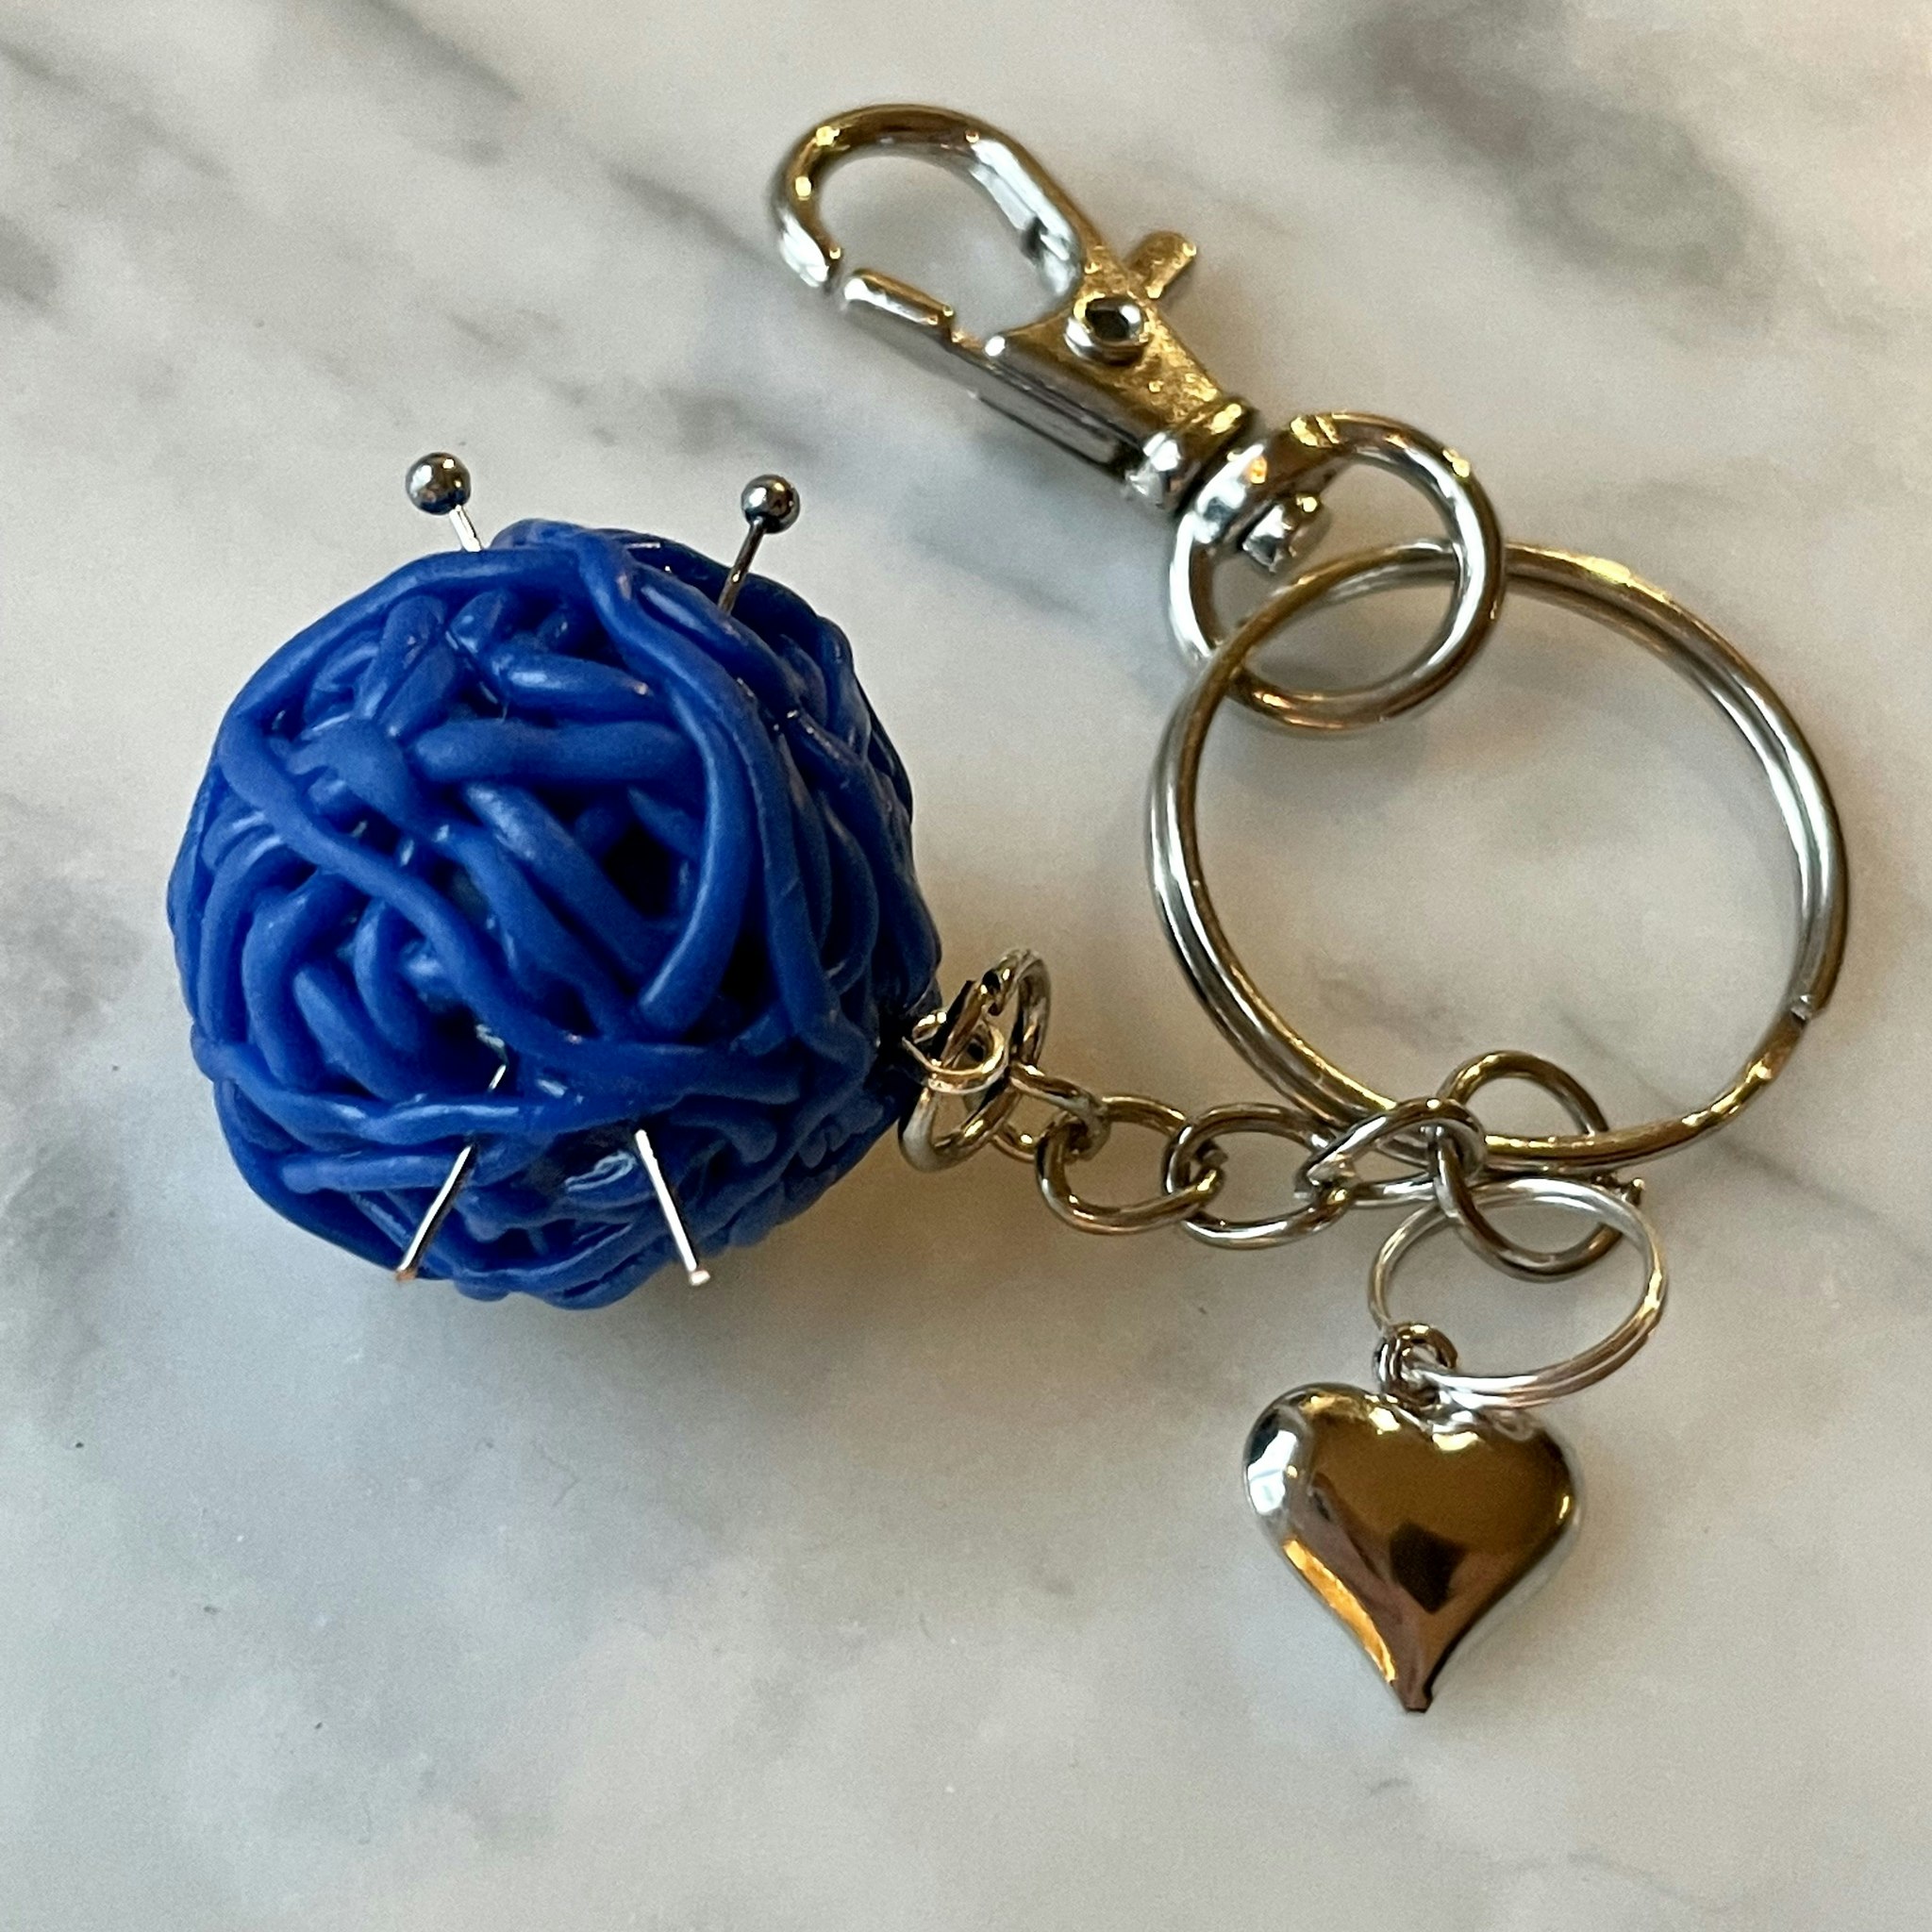 Ball of Yarn Key Chain Silver/Gold - Optional color